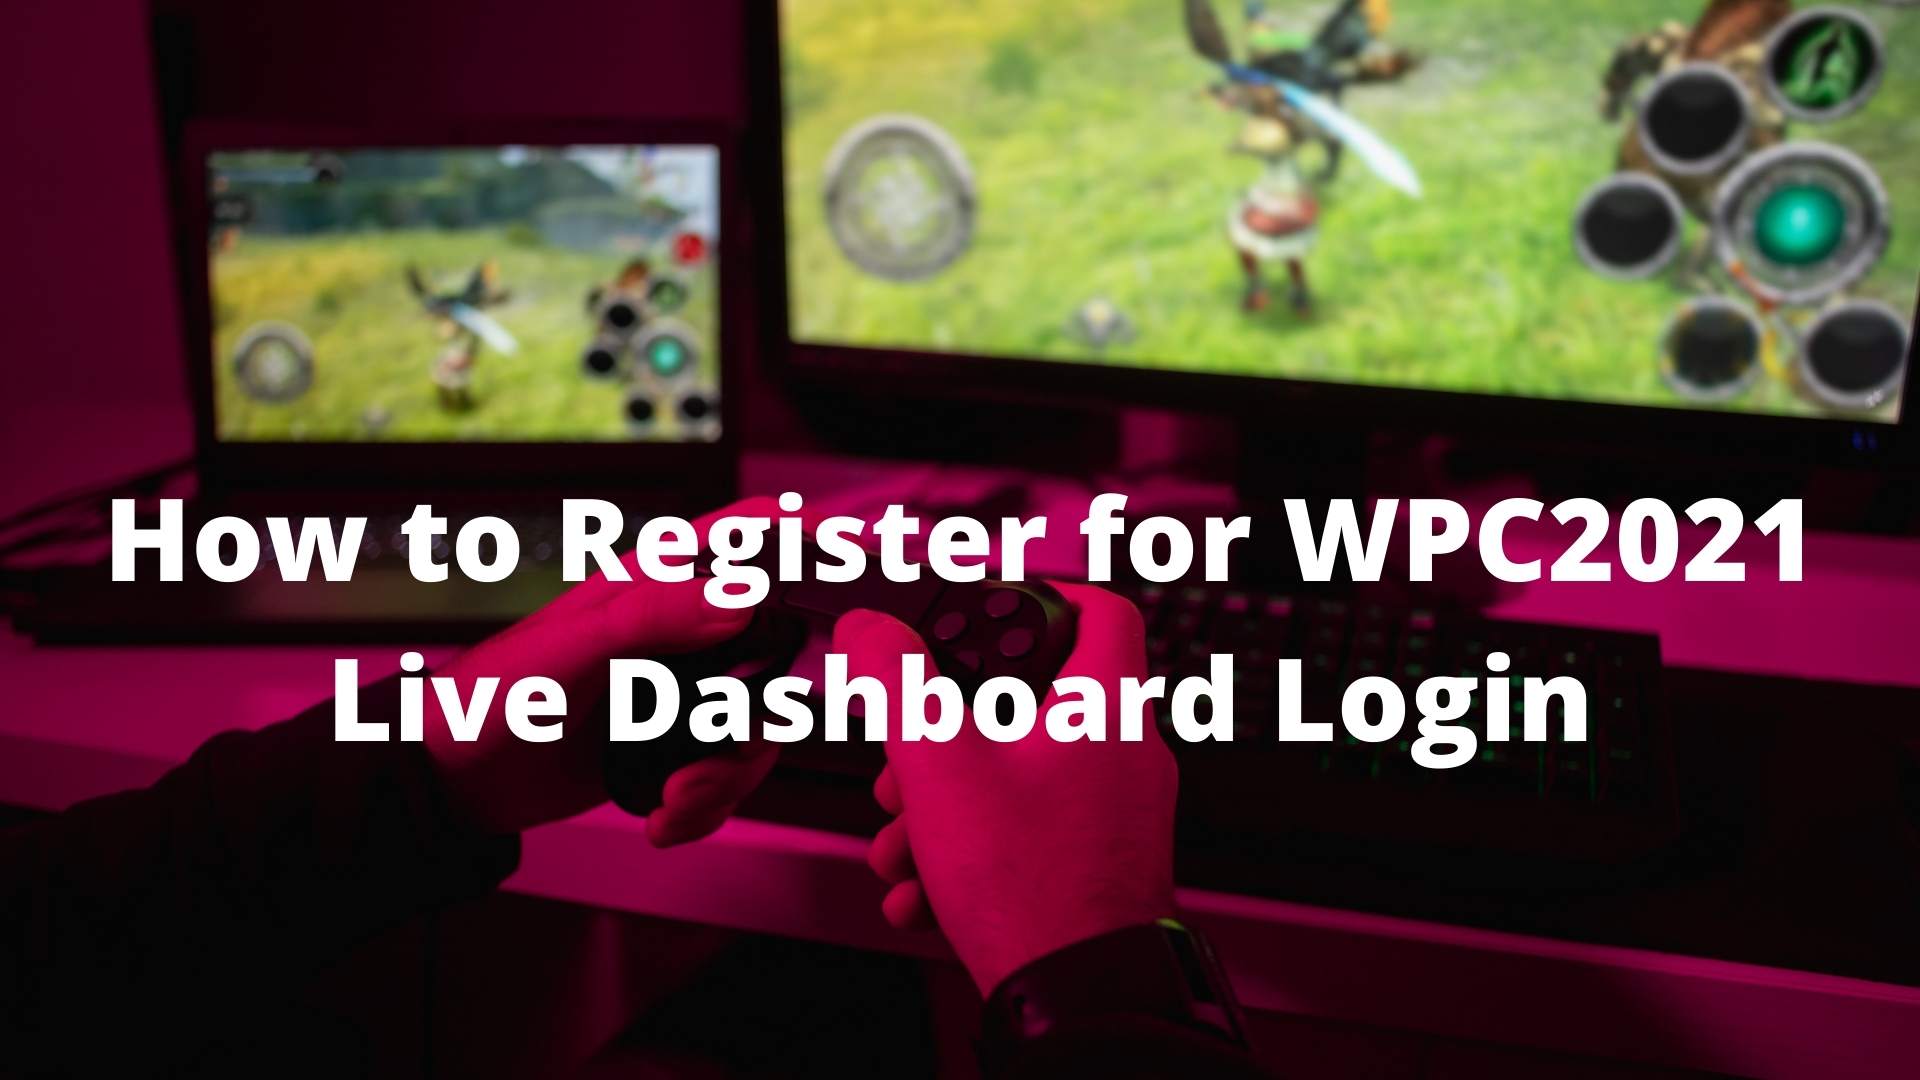 How to Register for WPC2021 Live Dashboard Login